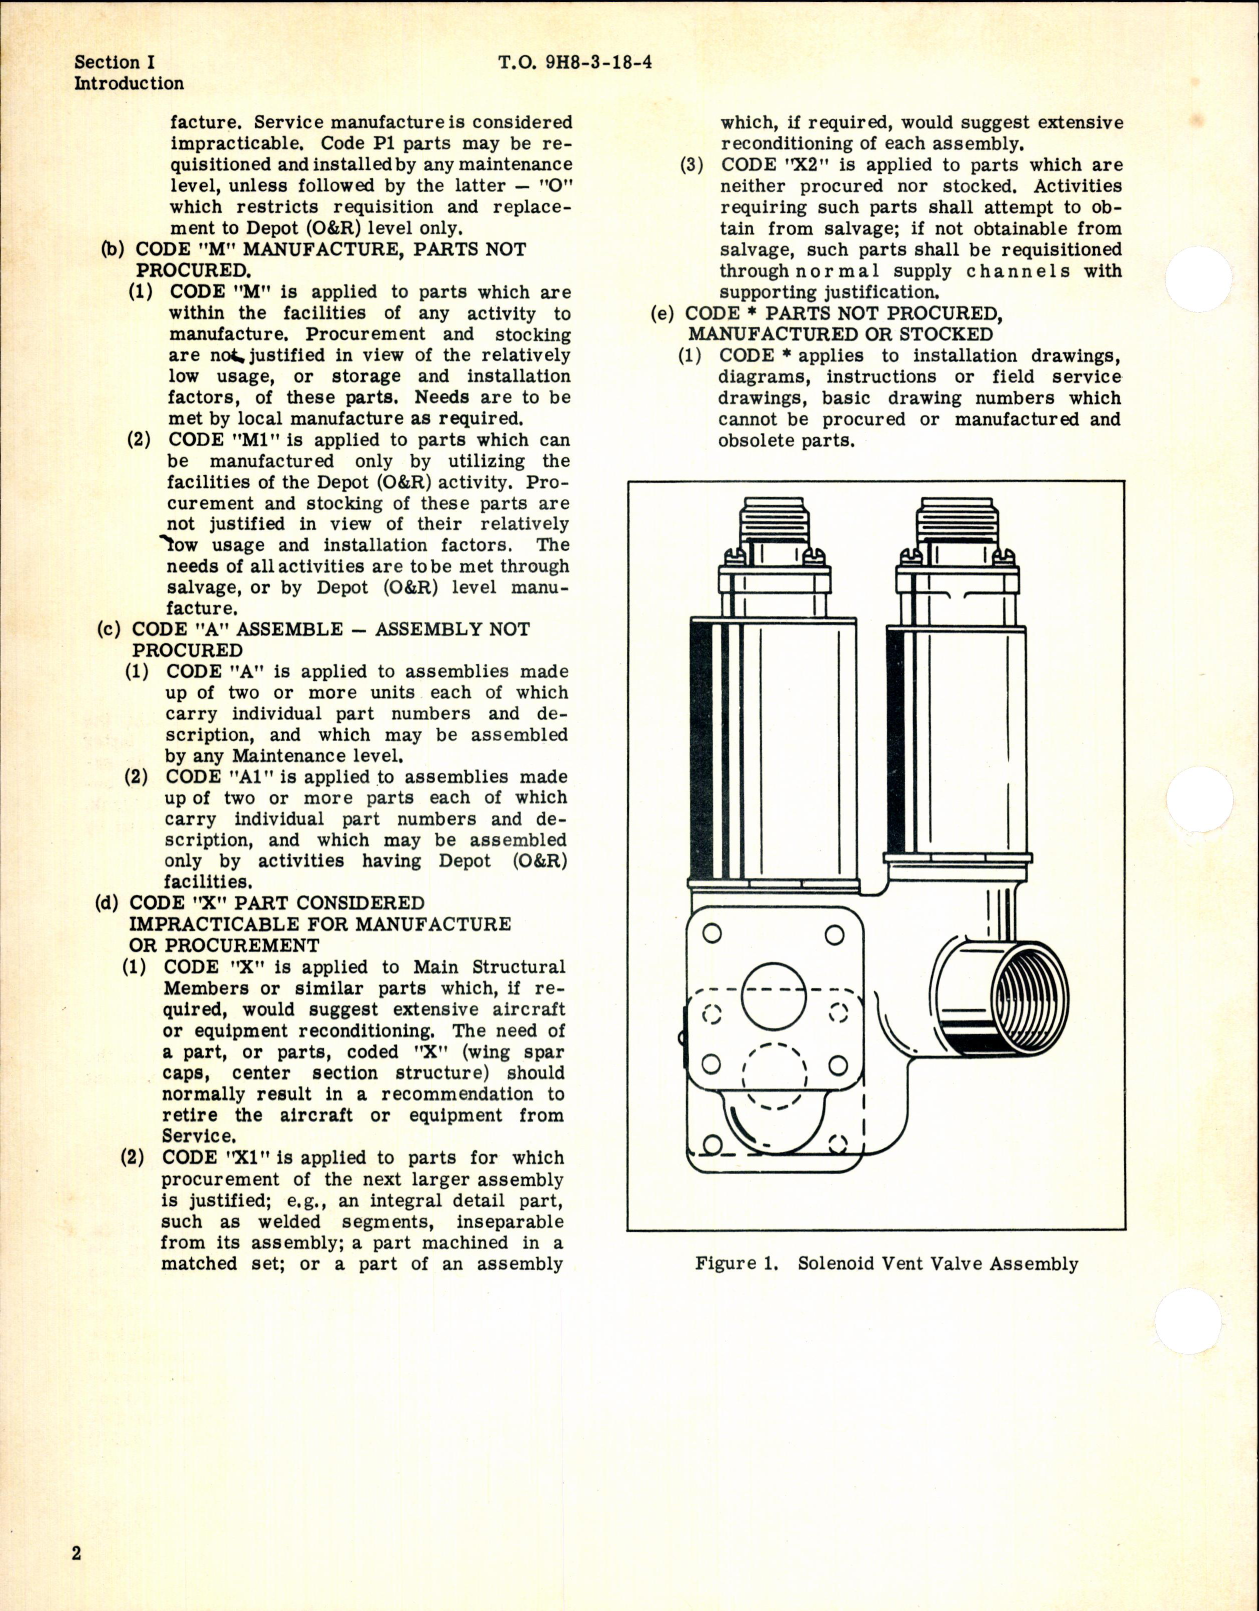 Sample page 4 from AirCorps Library document: Parts Breakdown for Solenoid Vent Valve Assembly